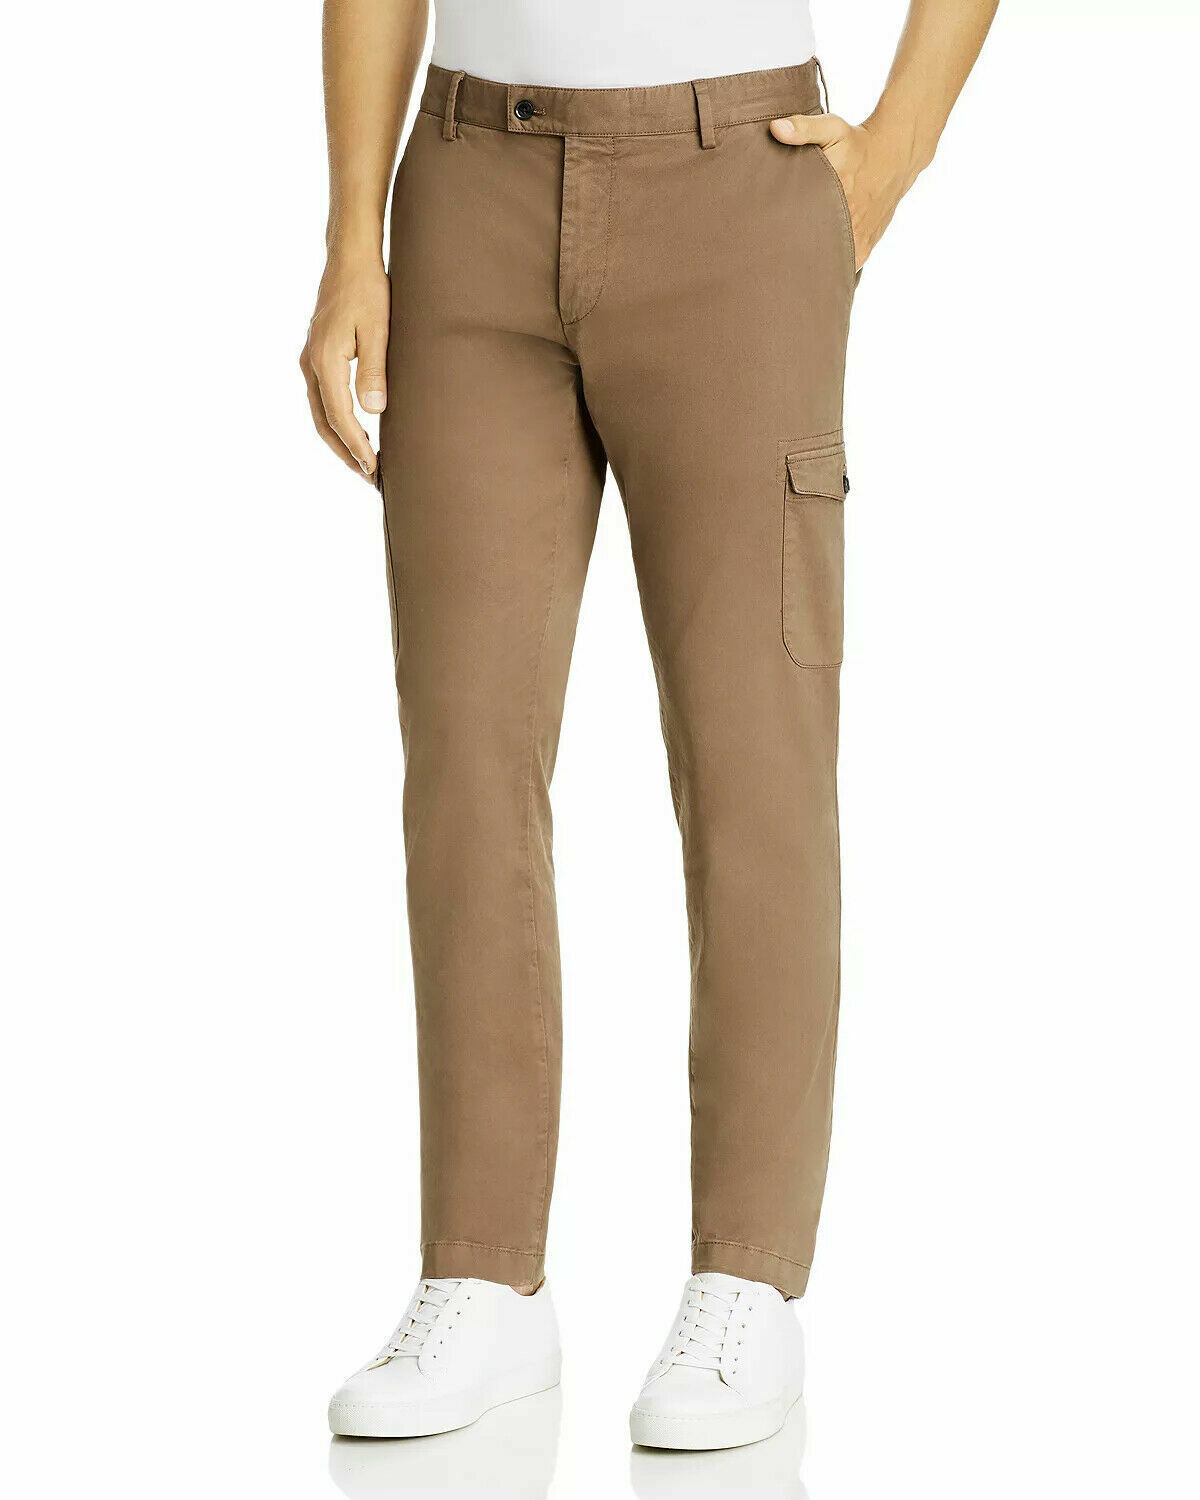 Primary image for Dylan Gray Classic Fit Cargo Pants in Acorn Brown-34Rx32